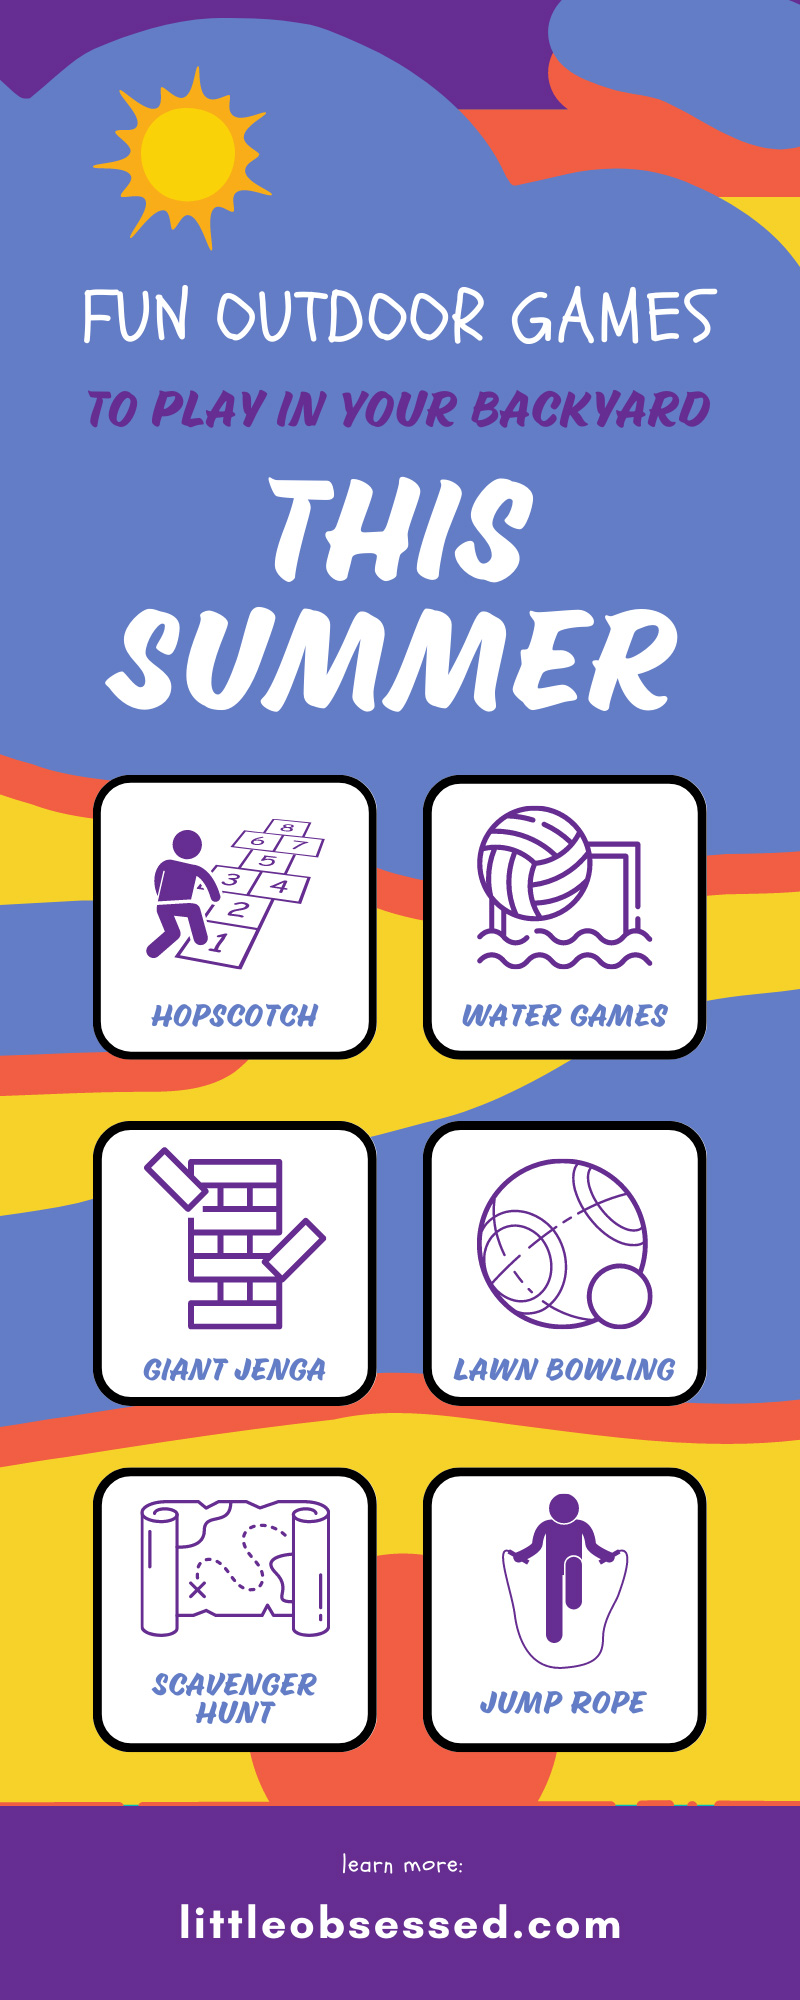 Fun Outdoor Games To Play in Your Backyard This Summer